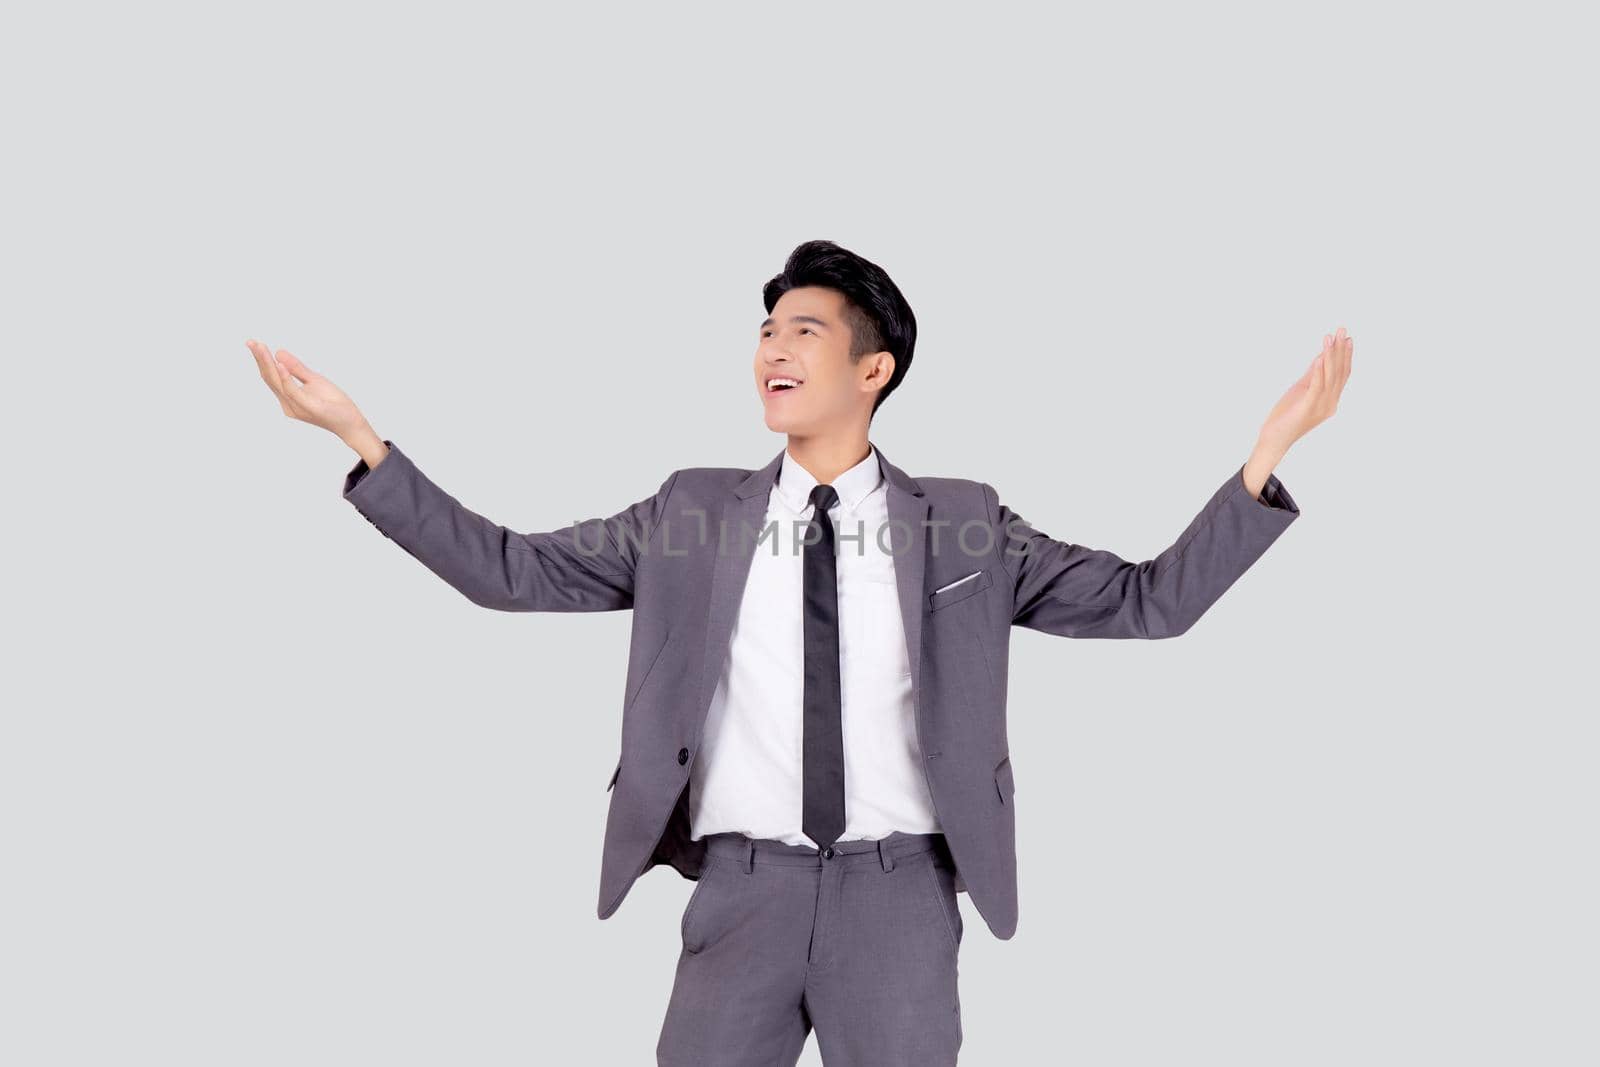 Portrait businessman in suit standing with win success isolated on white background, young asian business man is manager or executive having confident and excited is positive, expression and emotion.